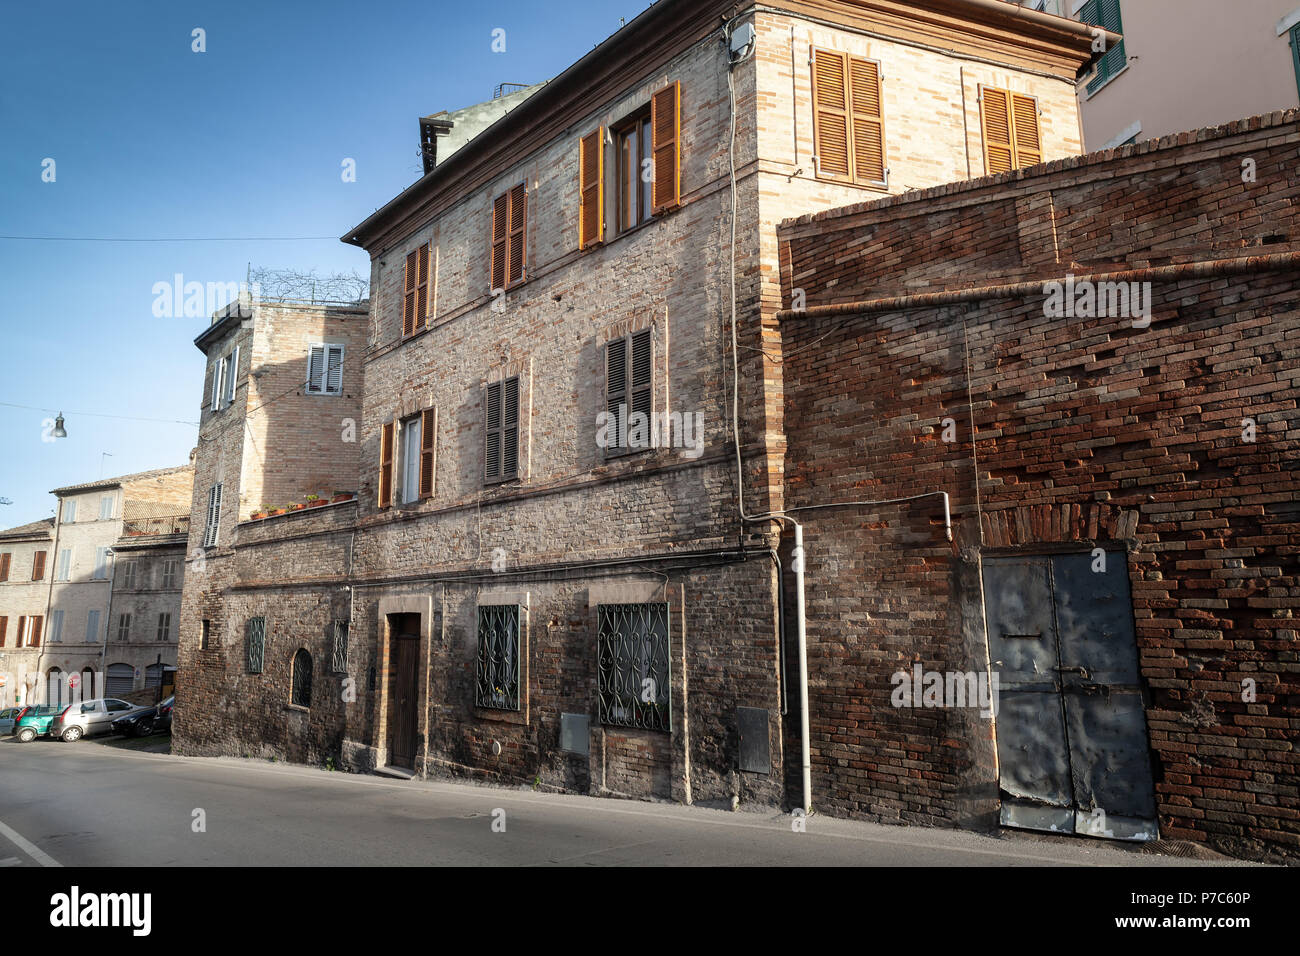 Street view of Fermo with old houses, Italy Stock Photo